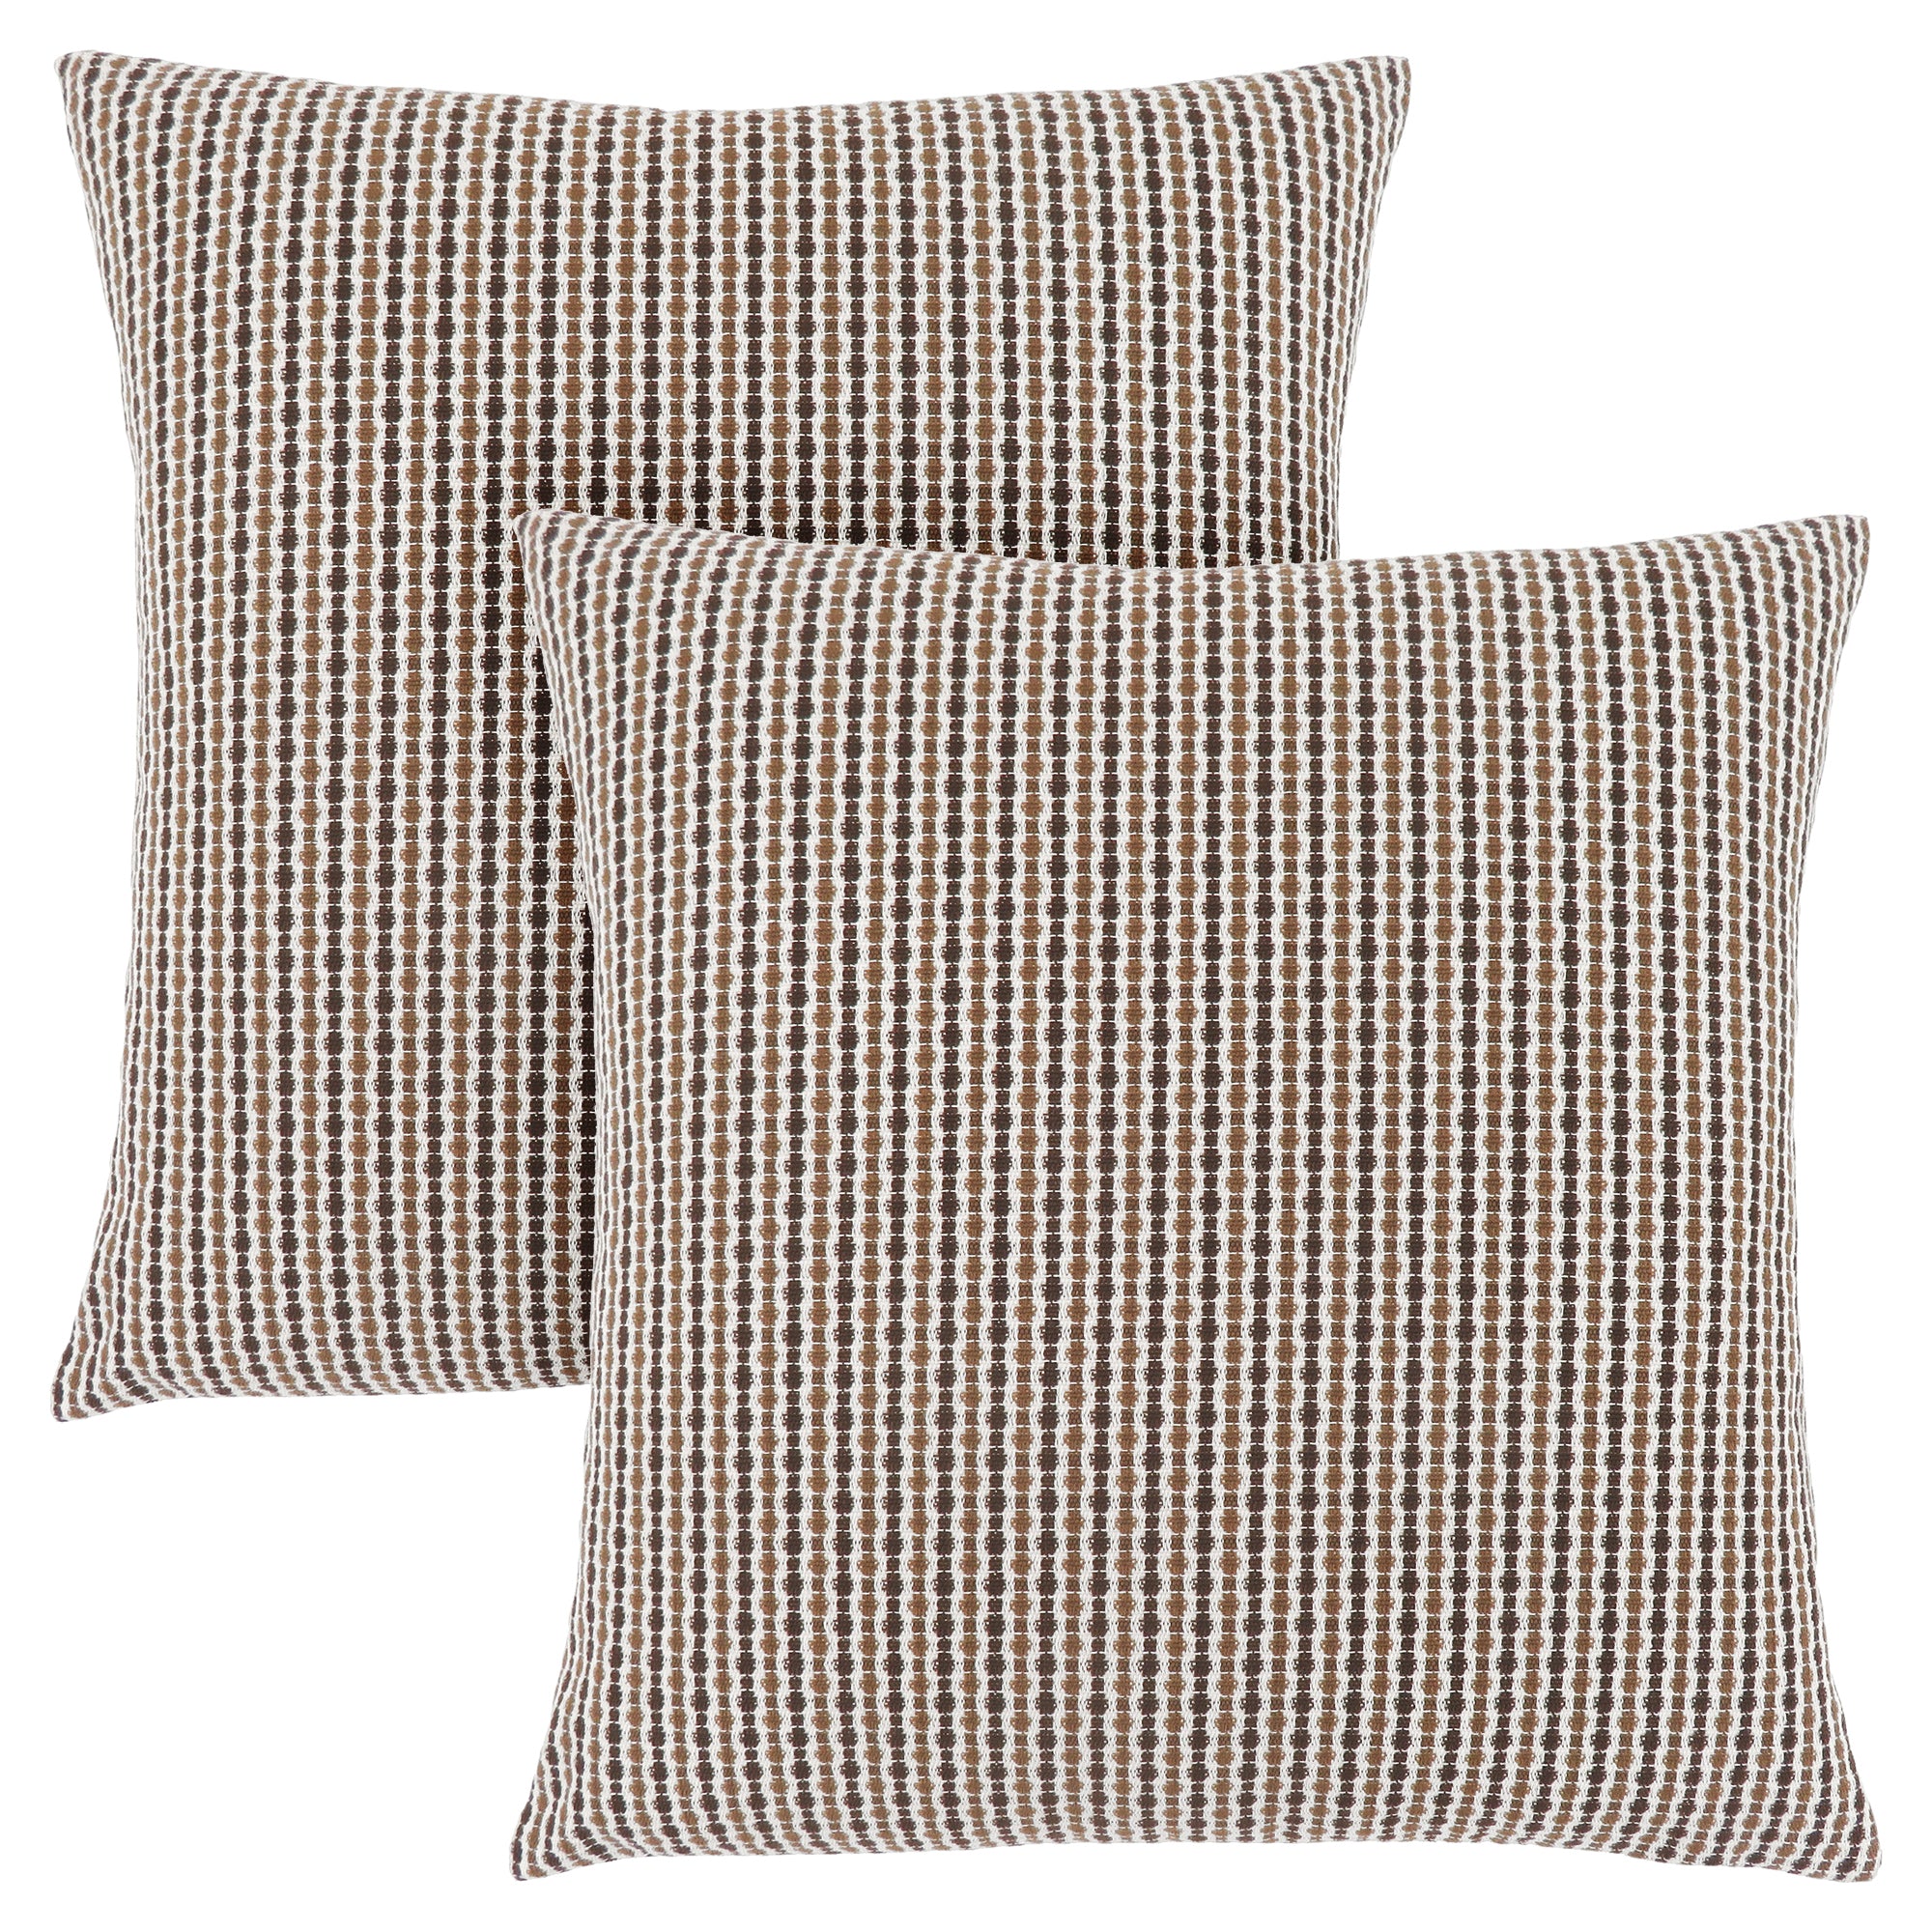 MN-519239    Pillows, Set Of 2, 18 X 18 Square, Insert Included, Decorative Throw, Accent, Sofa, Couch, Bed, Soft Polyester Woven Fabric, Hypoallergenic Soft Polyester Insert, Light And Dark Brown, Abstract Dot Design, Classic Dot Design, Classic